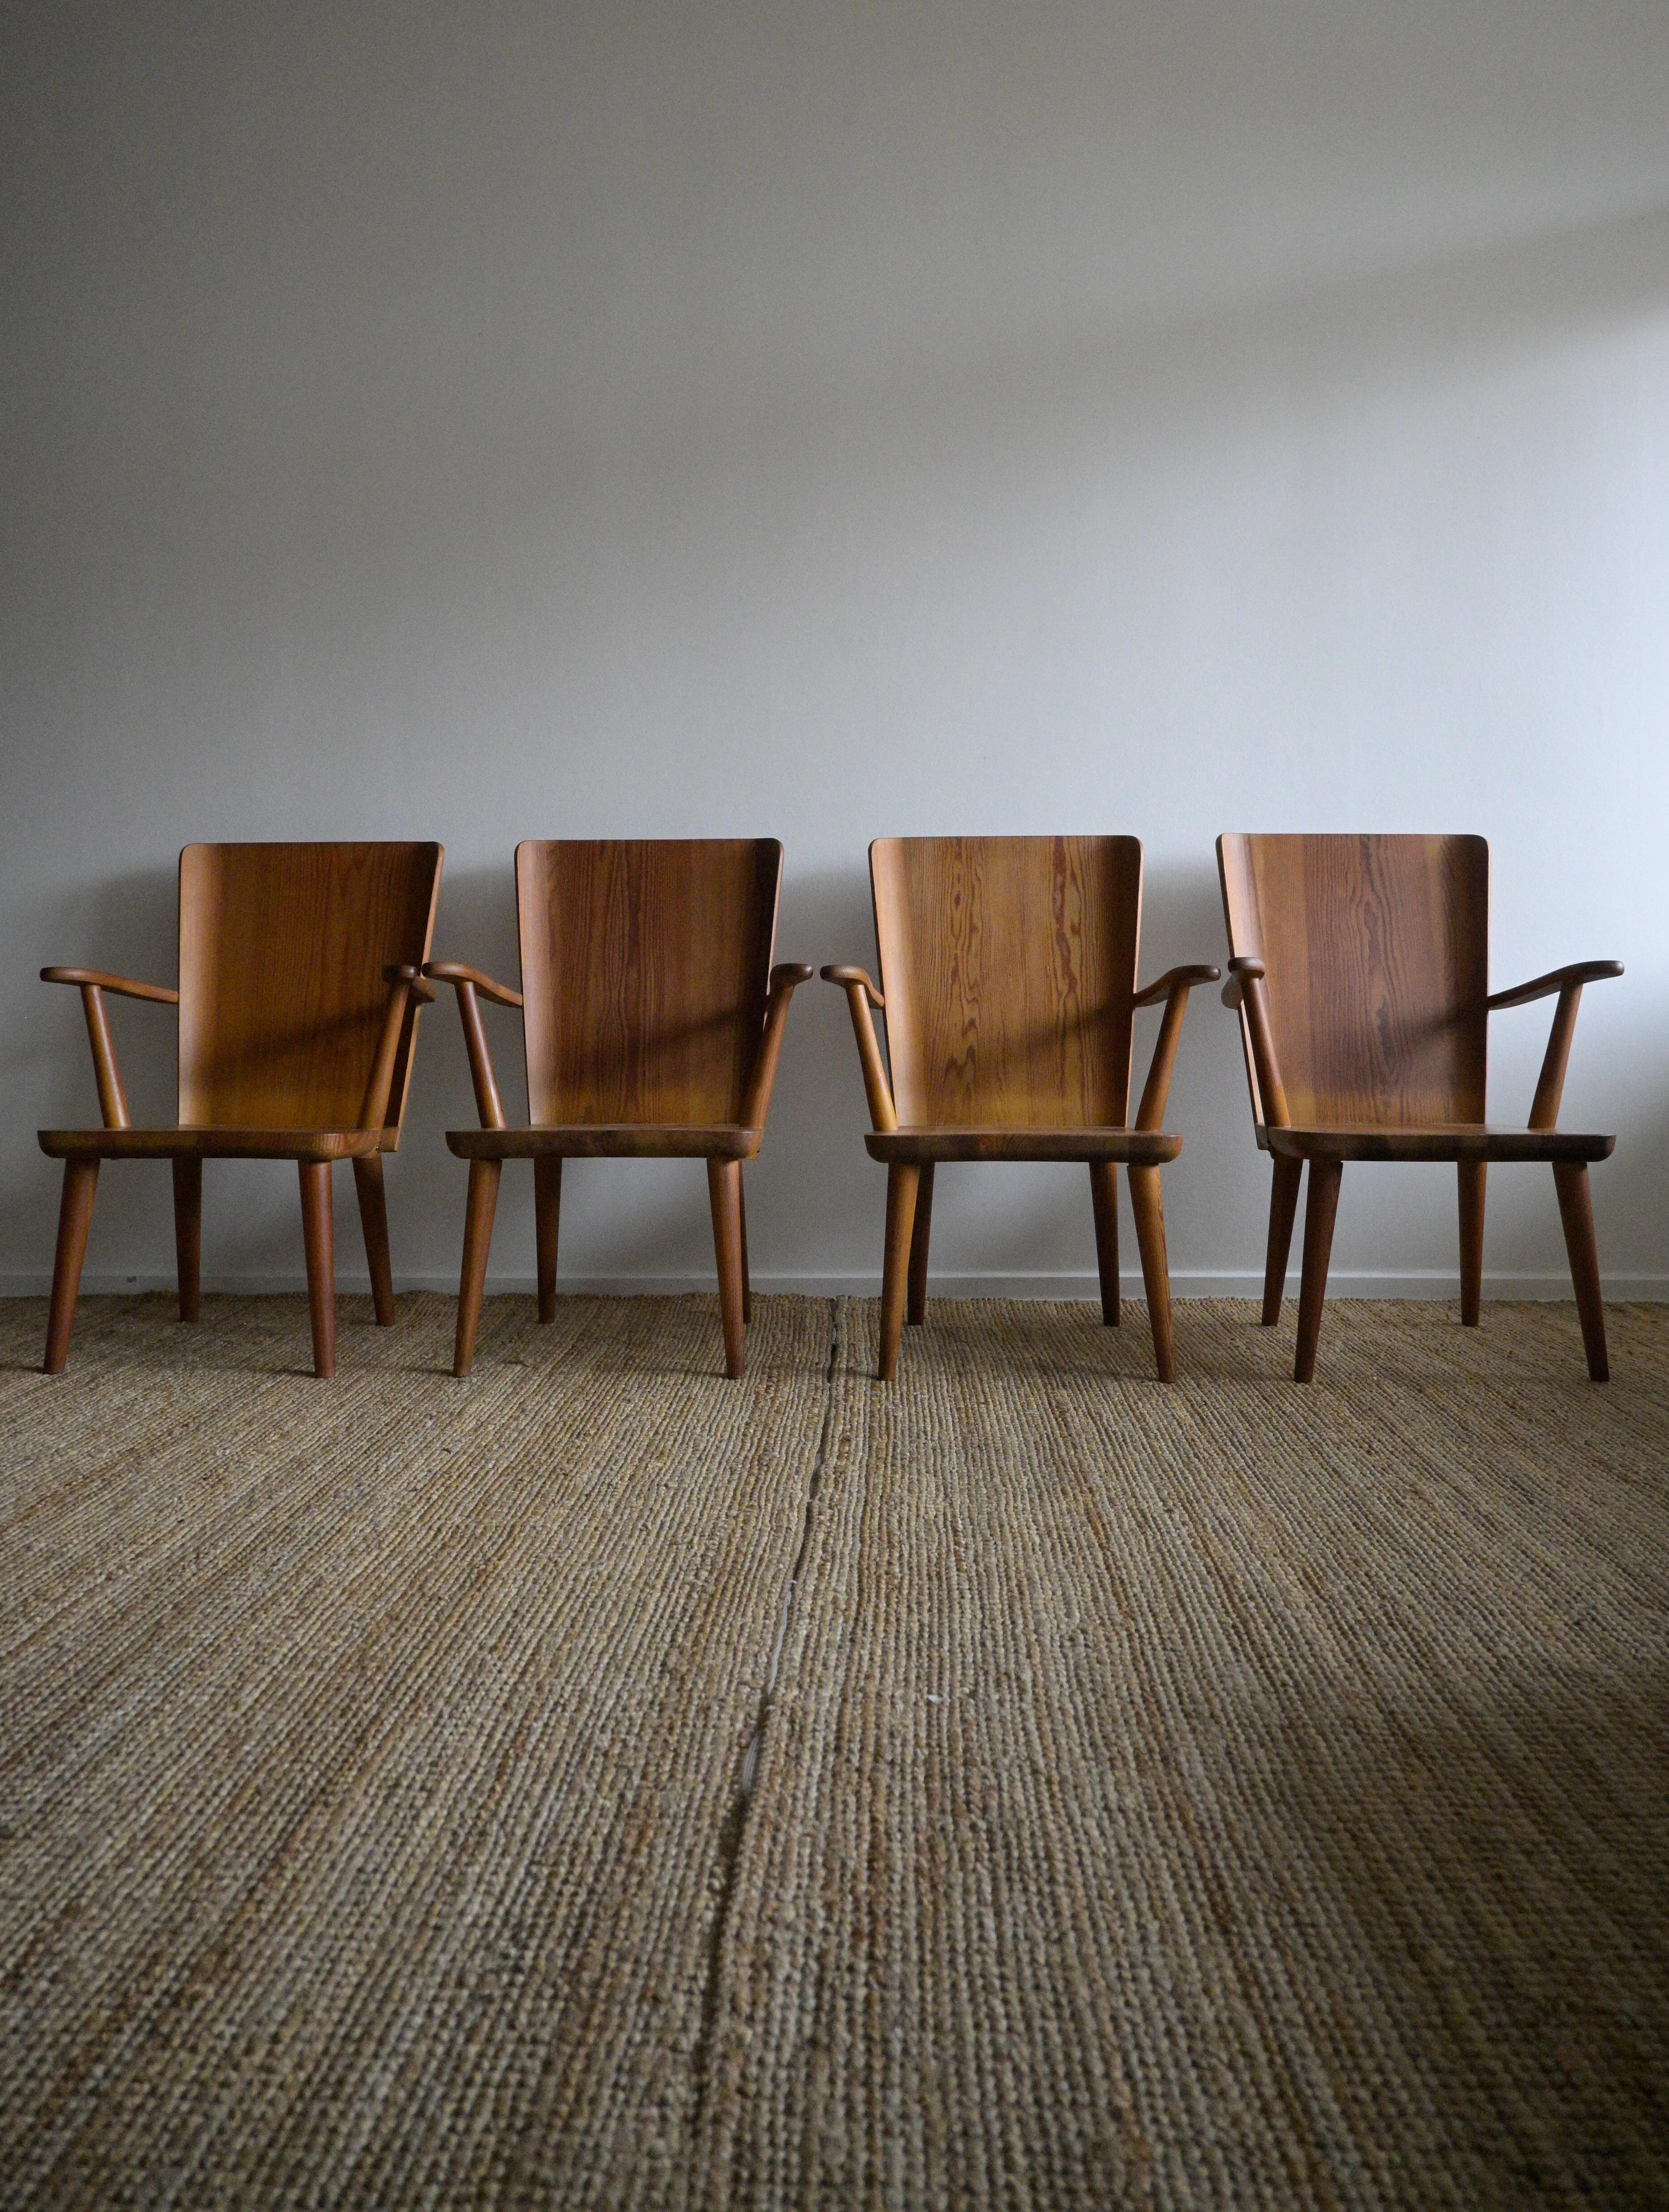 A set of four mid-century armchairs
designed by Göran Malmvall
Produced by Svensk Furu in the 1940s

Showing signs of age and use.
One chair has dry cracks on the armrests. And one has a repaire on one armrest.

Heigth: 86 cm/33.8 inch
Depth: 46